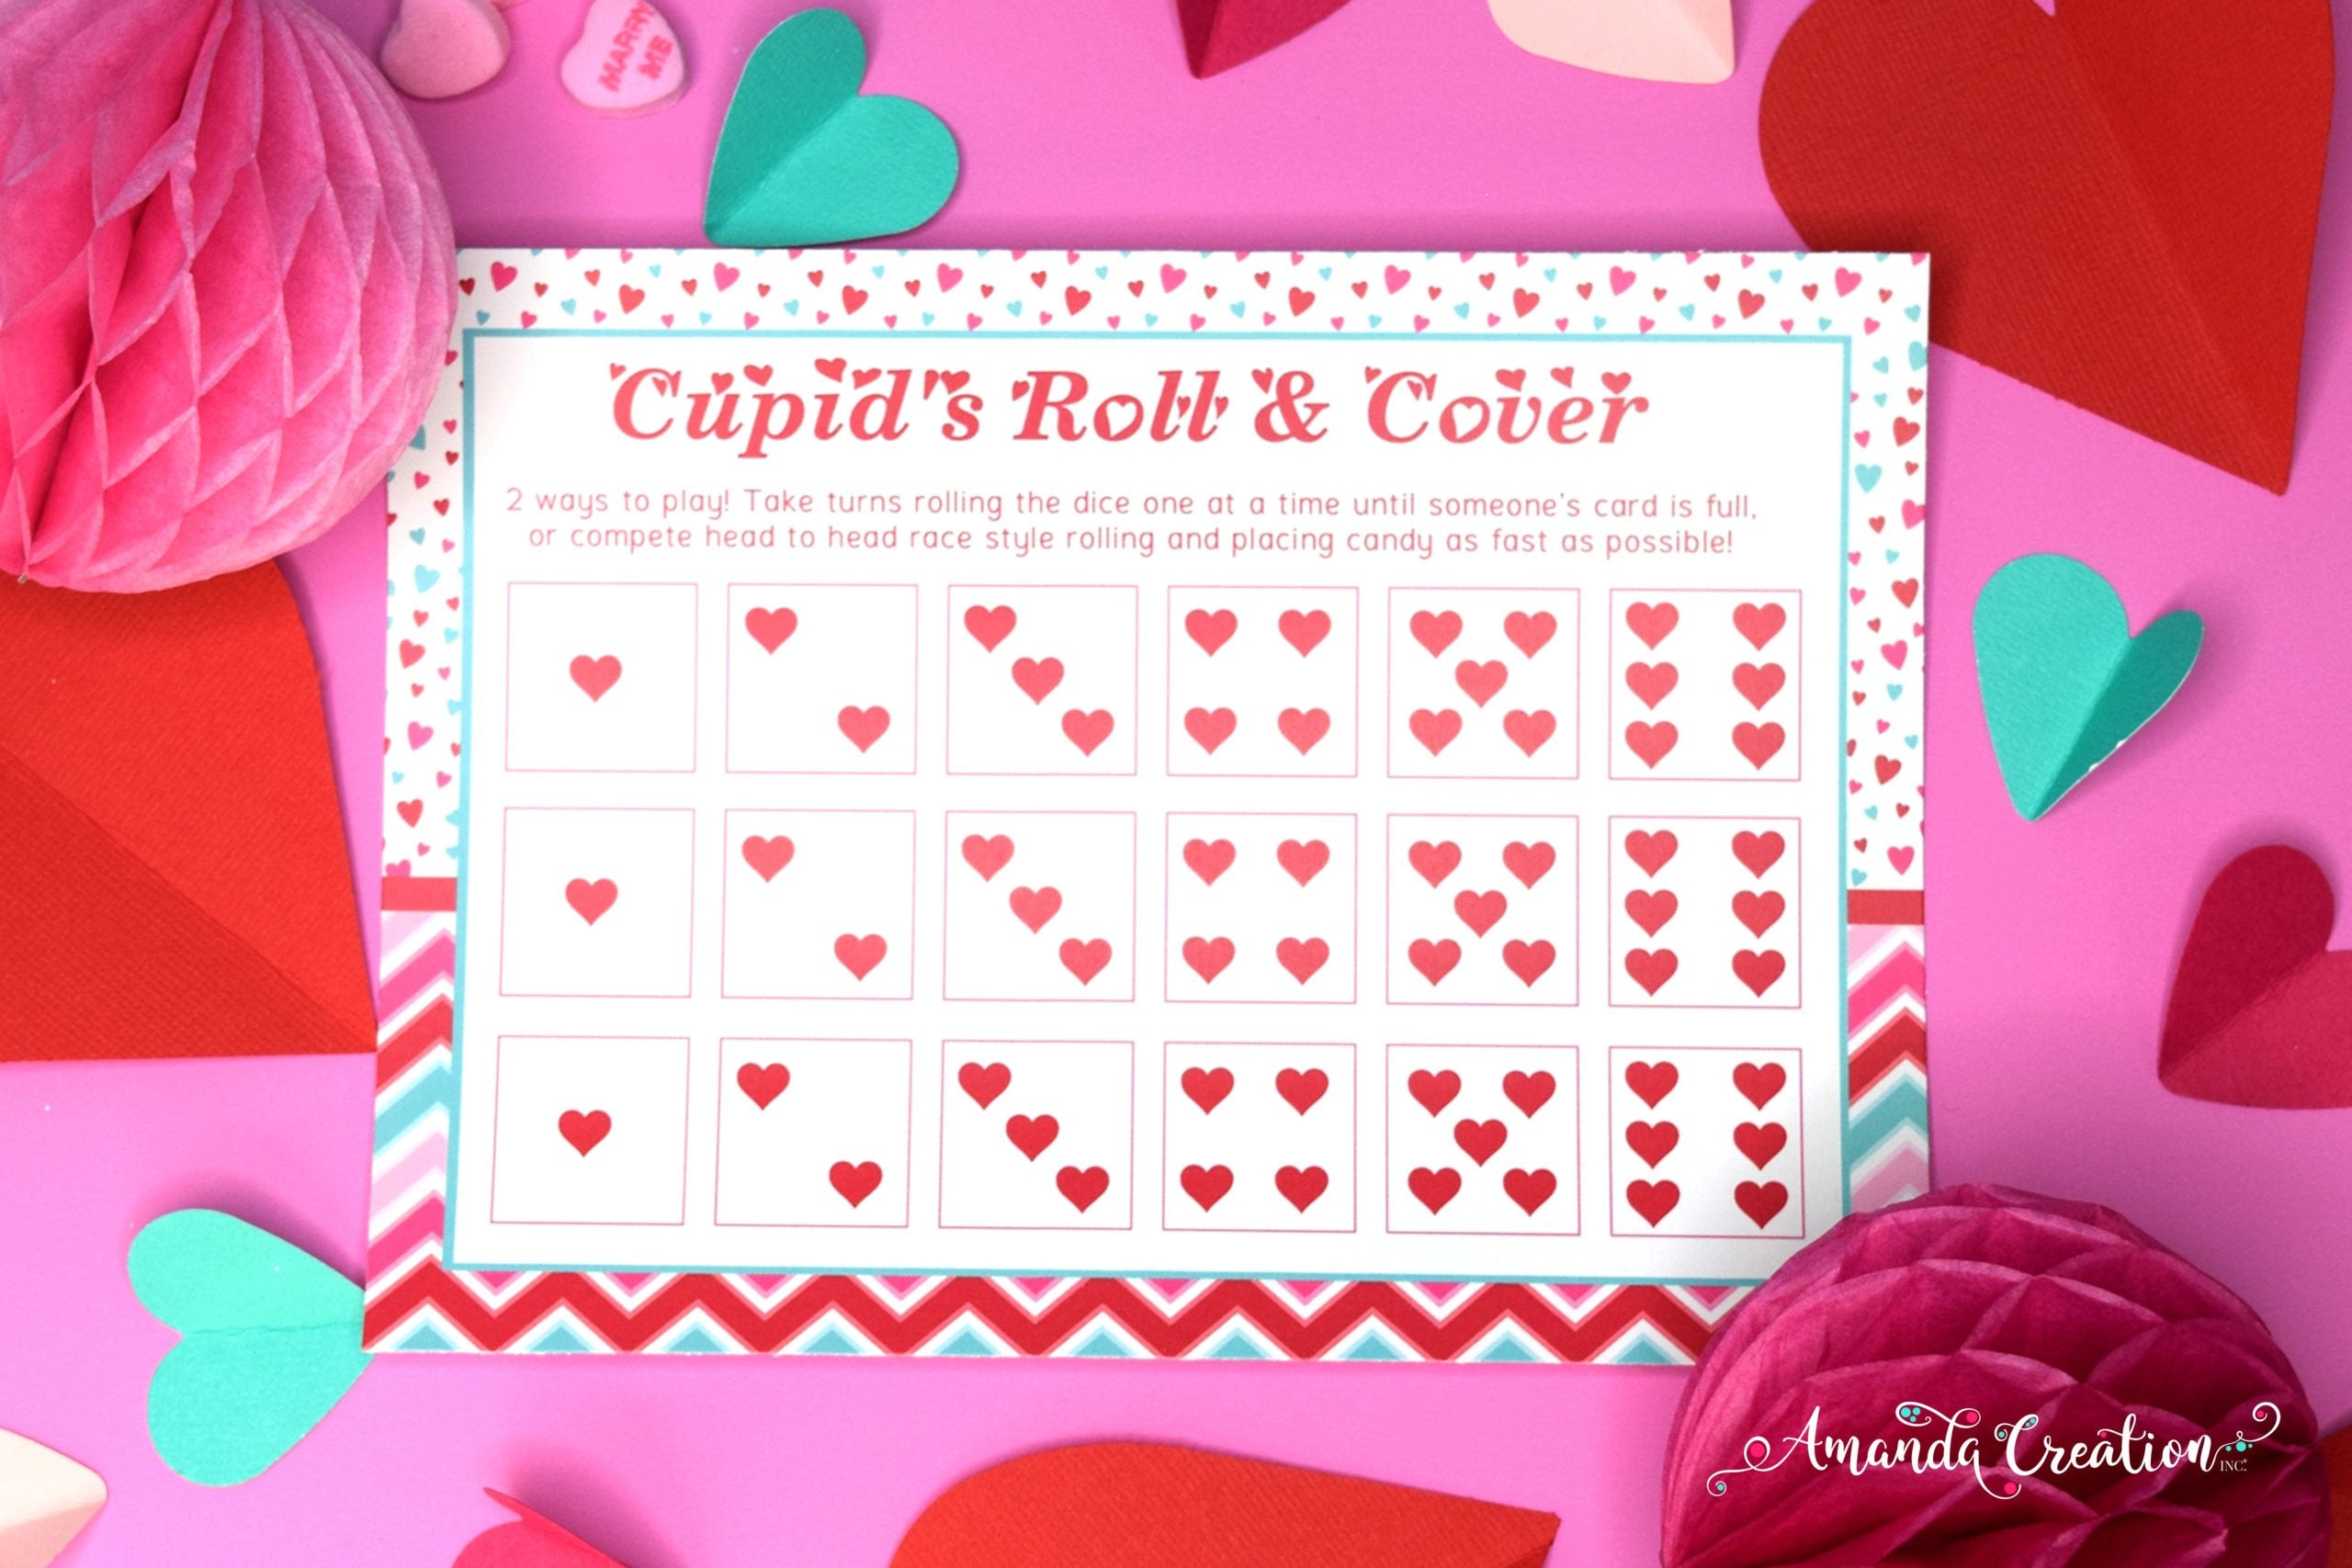 Cupid's Roll & Cover Valentine's Day Game